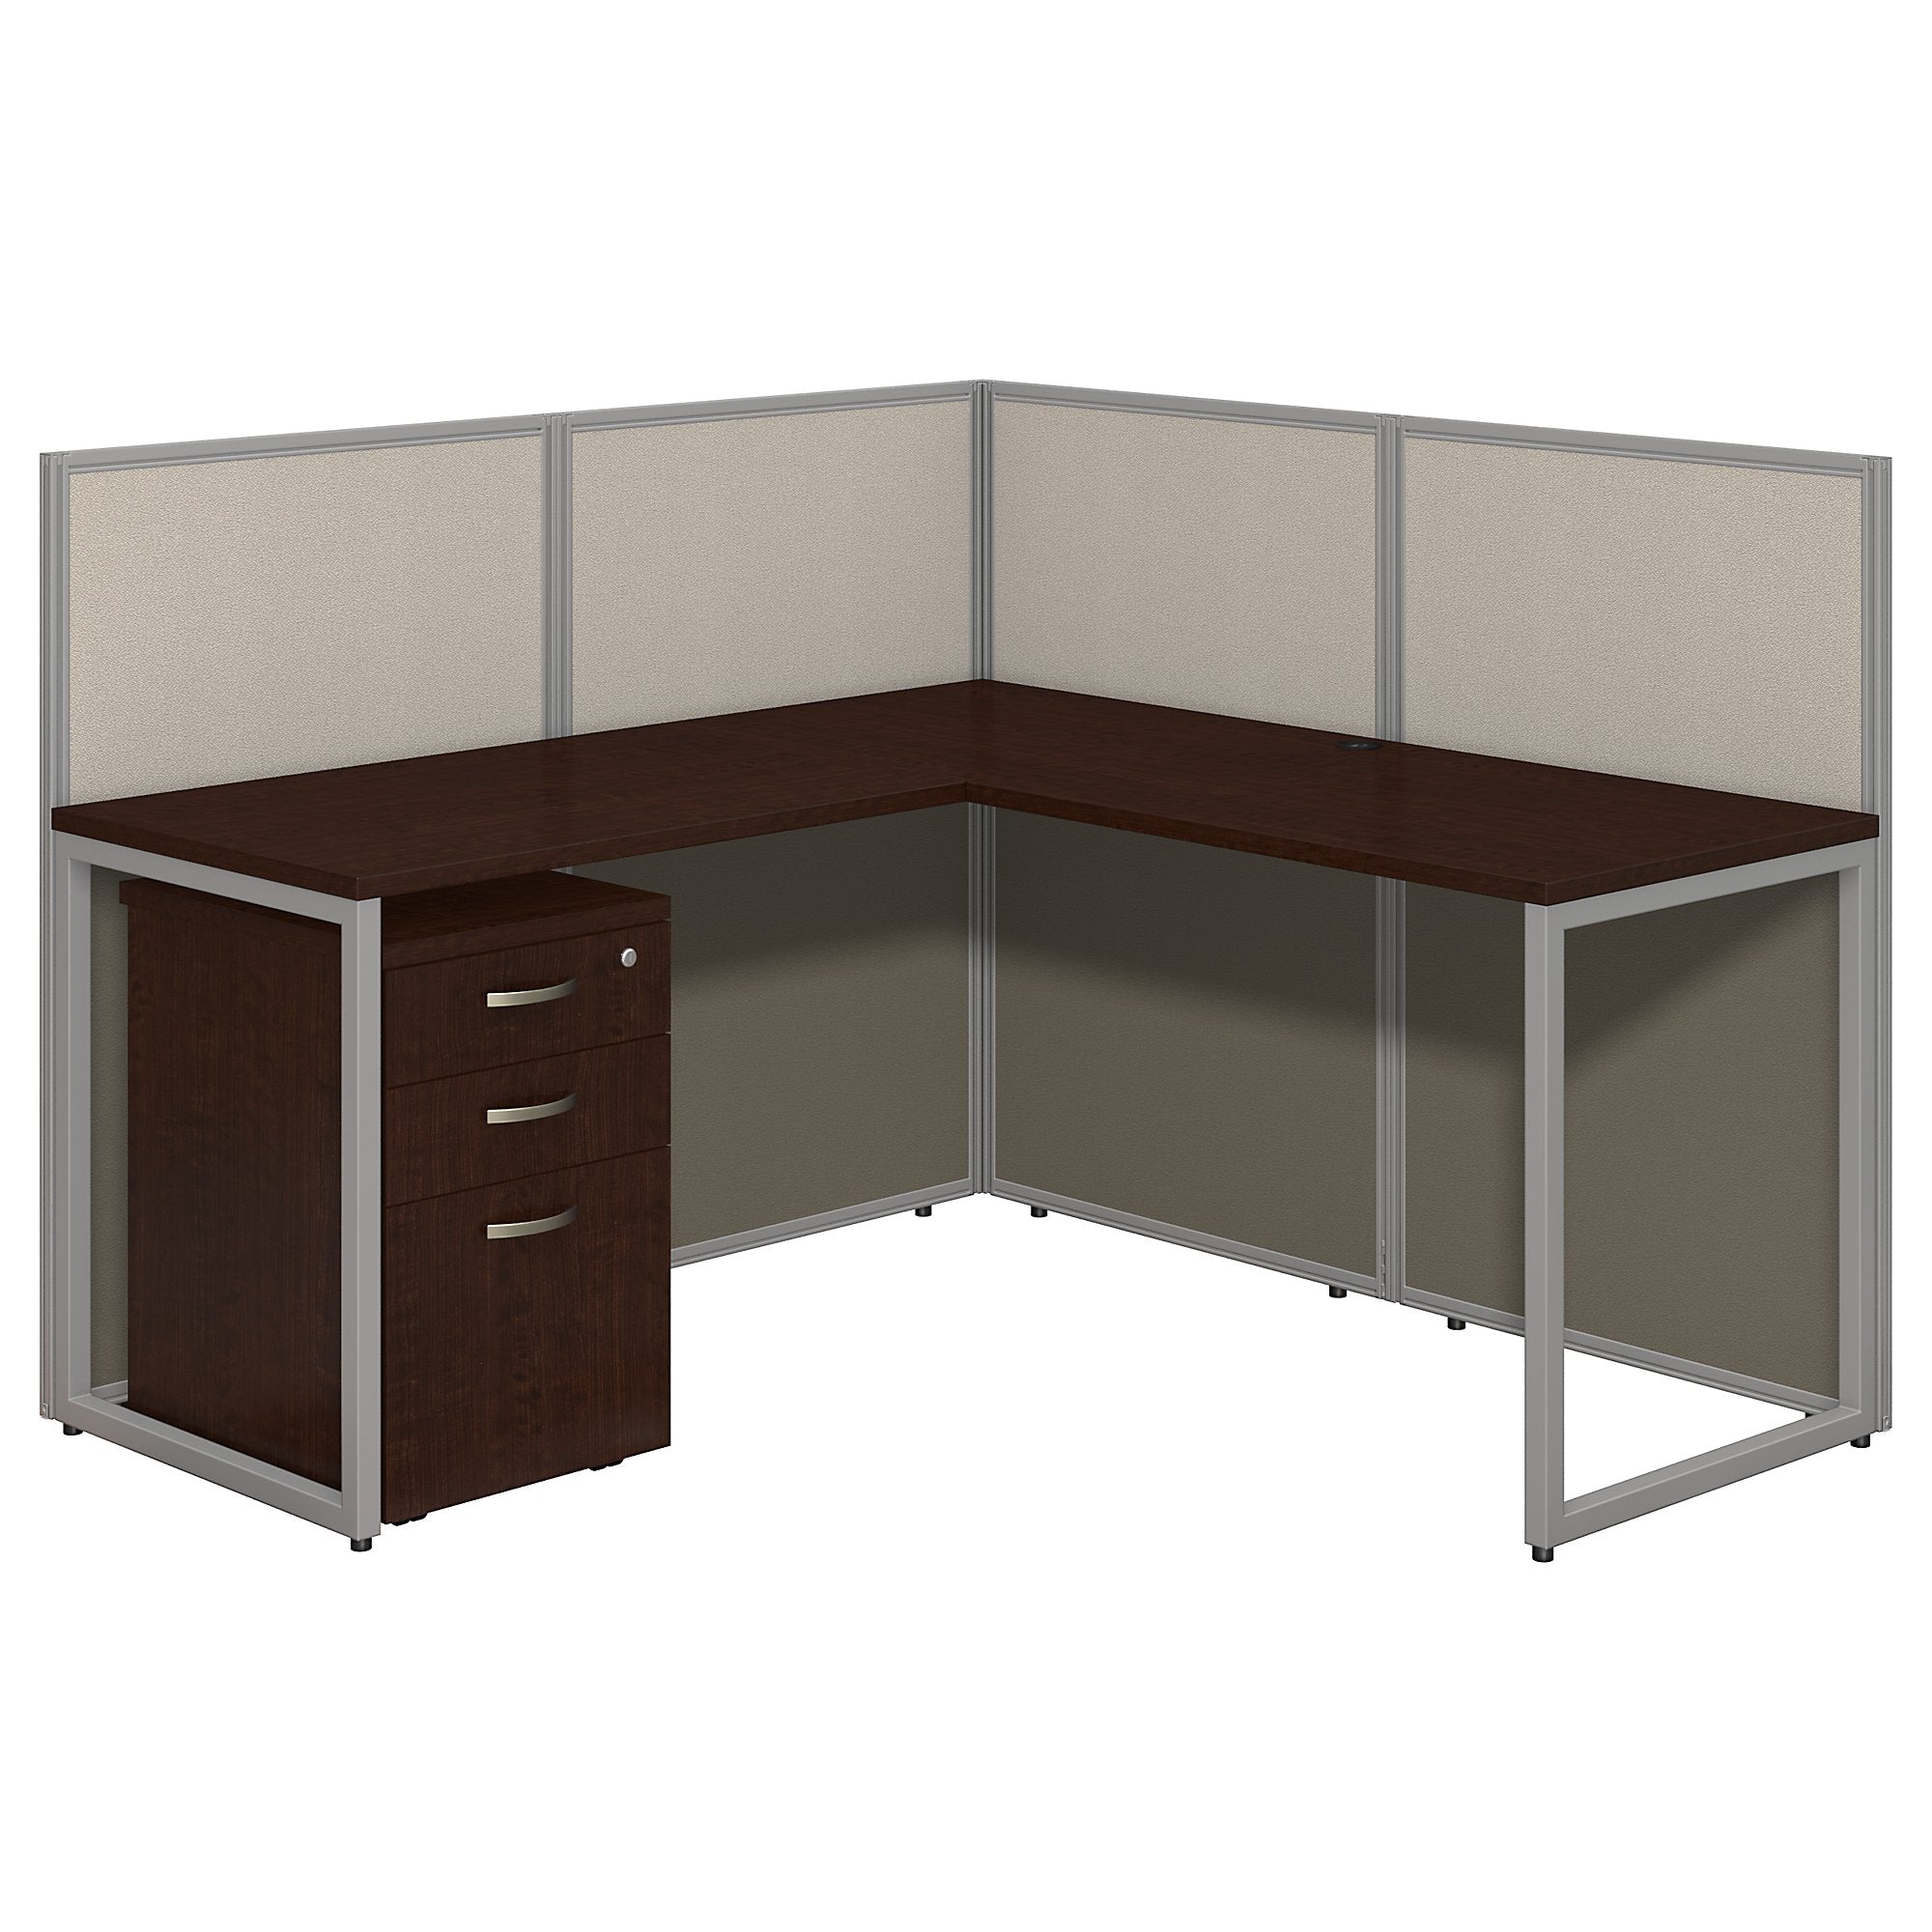 Bush Business Furniture Easy Office 60W L Shaped Desk Open Office with Mobile File Cabinet | Mocha Cherry